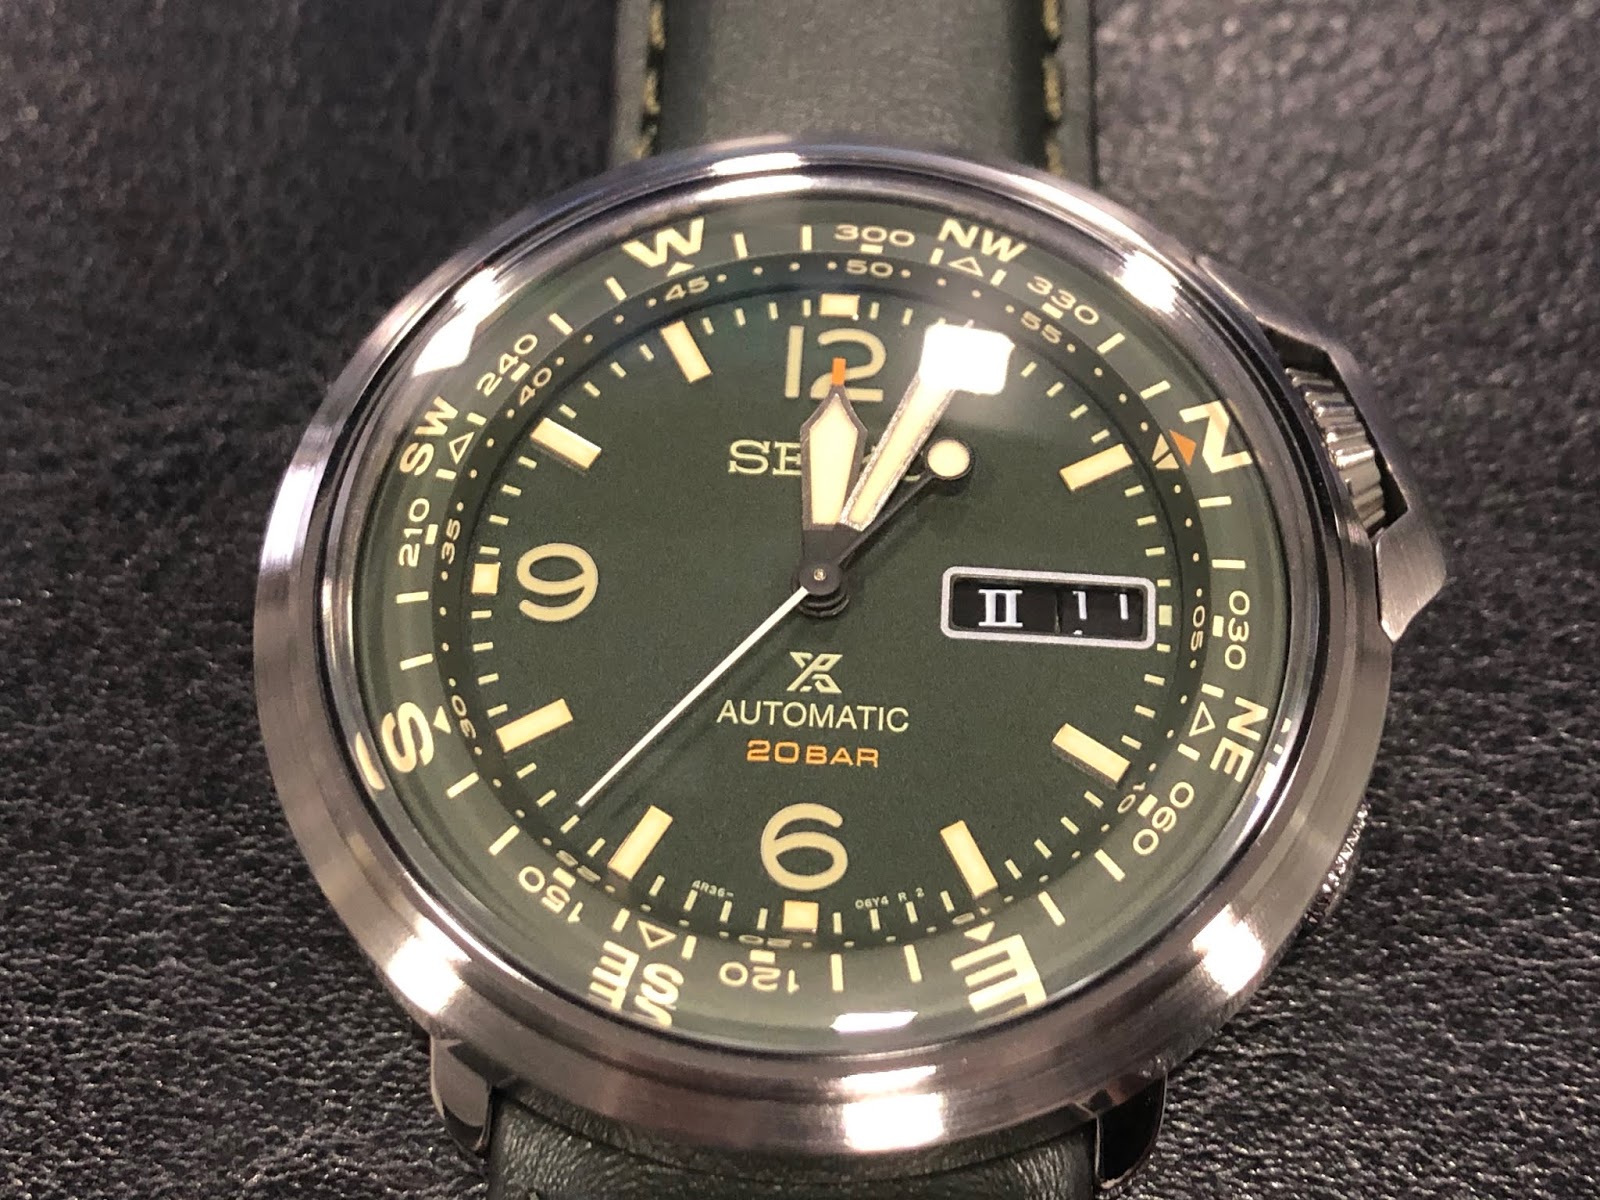 Seiko Prospex Automatic Field Compass SRPD31K1 - Hands-On Review